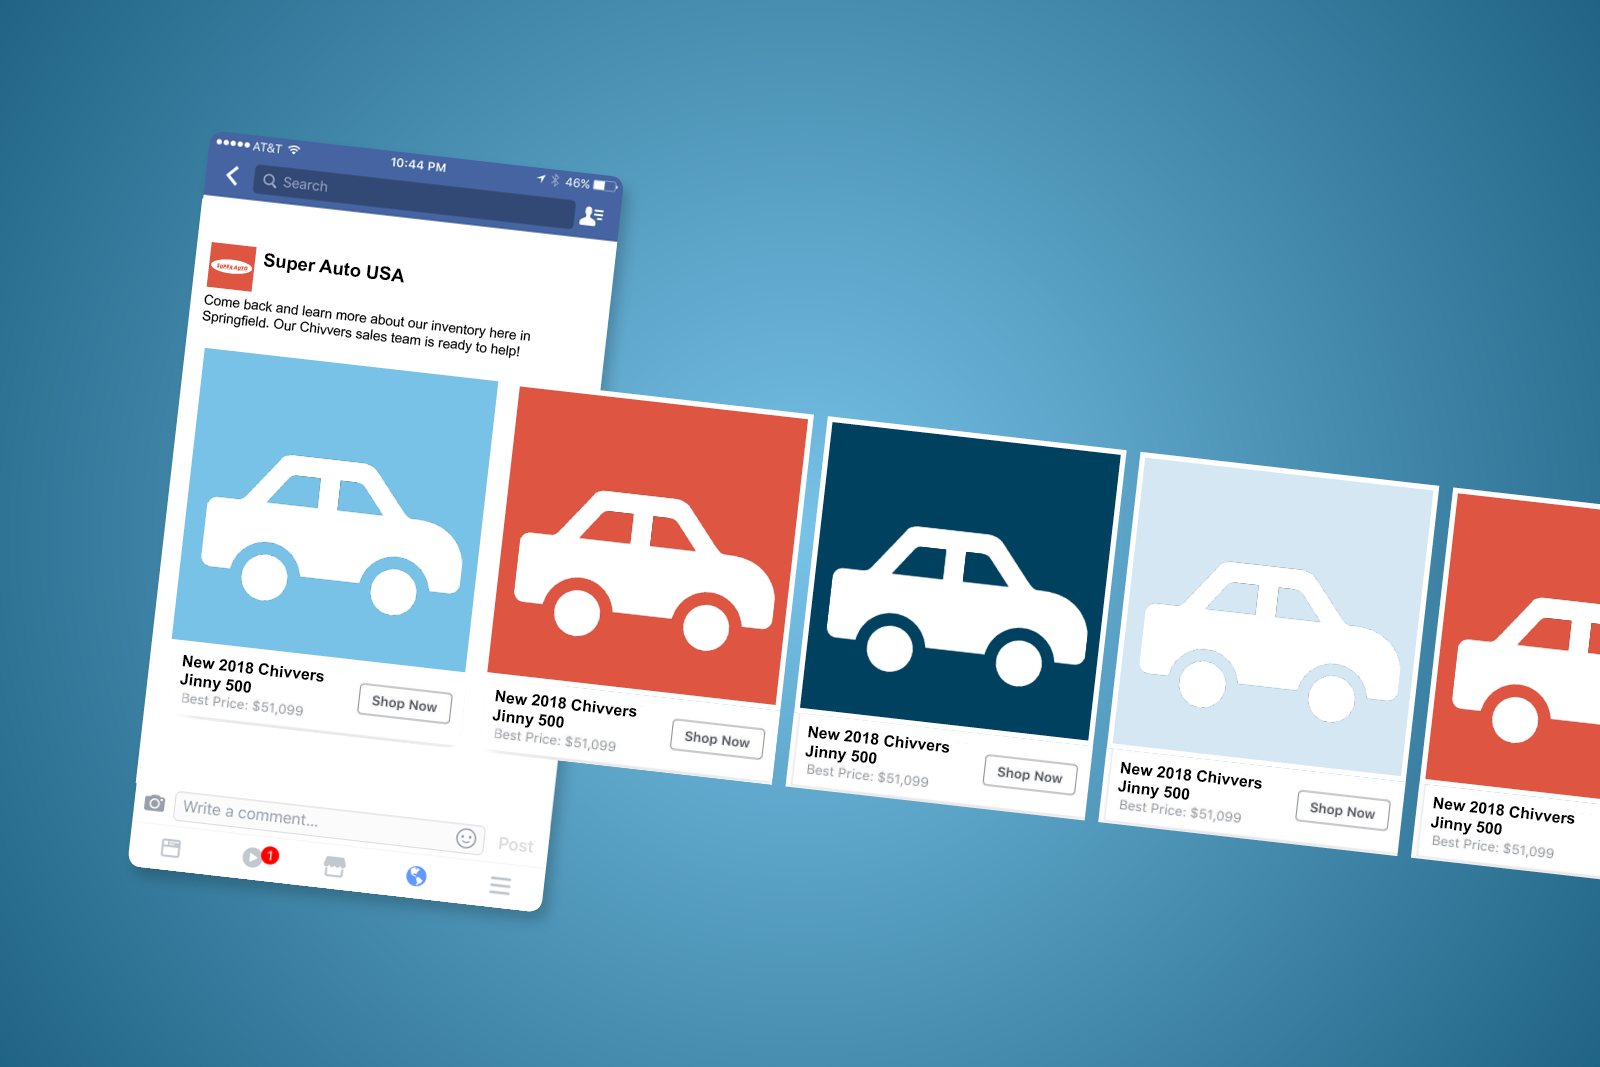 5 Ideas for Great Automotive Carousel Ads on Facebook